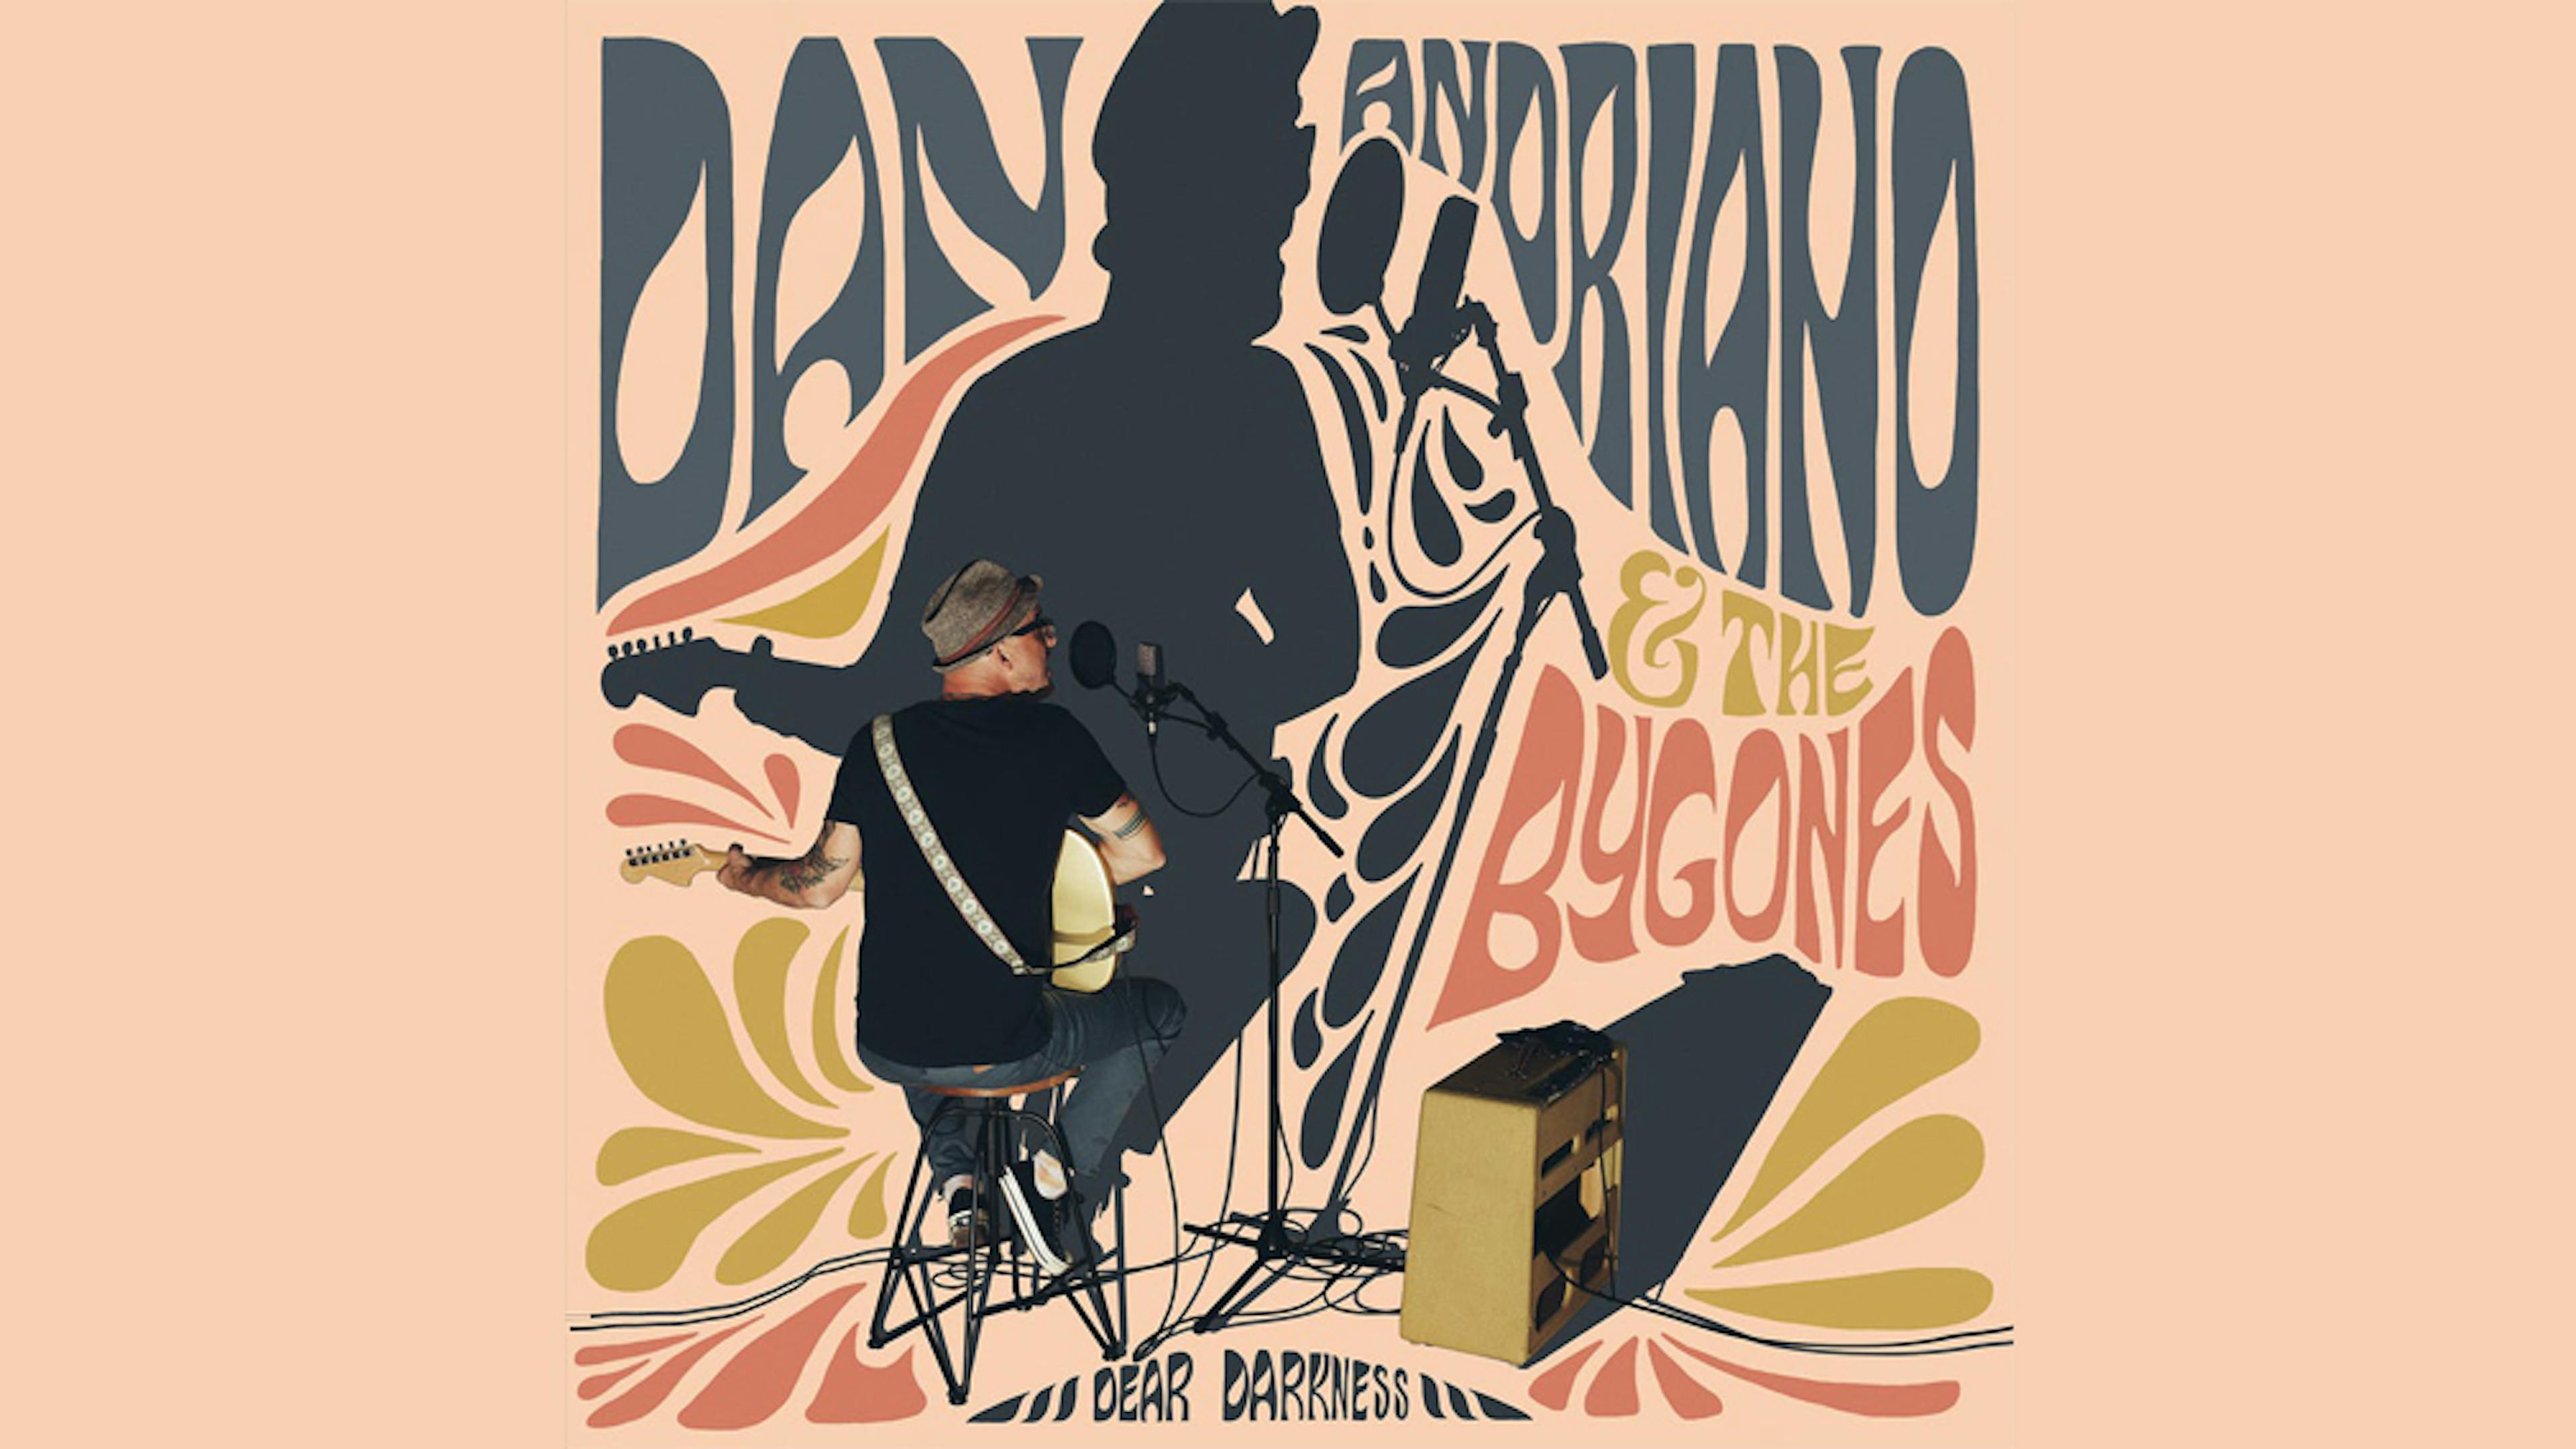 Album review: Dan Andriano & The Bygones – Dear Darkness